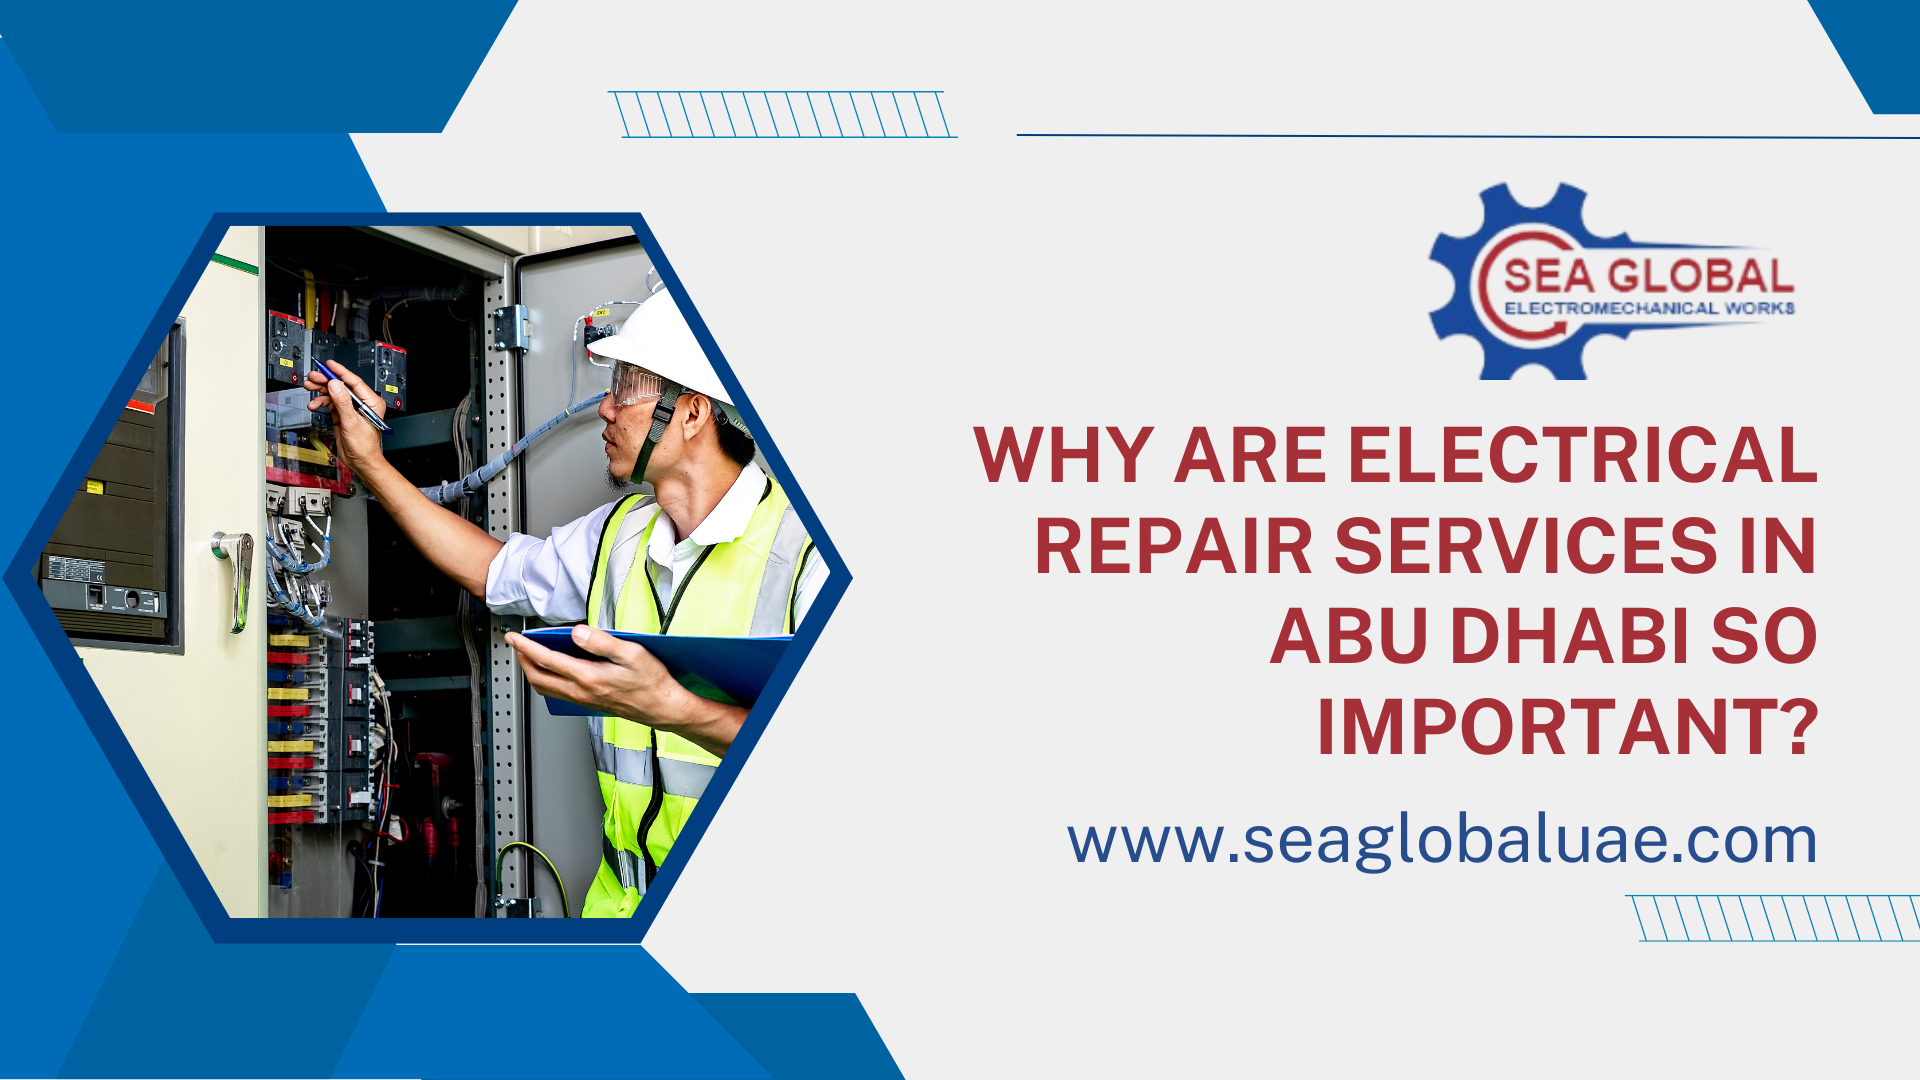 Why Are Electrical Repair Services in Abu Dhabi So Important?